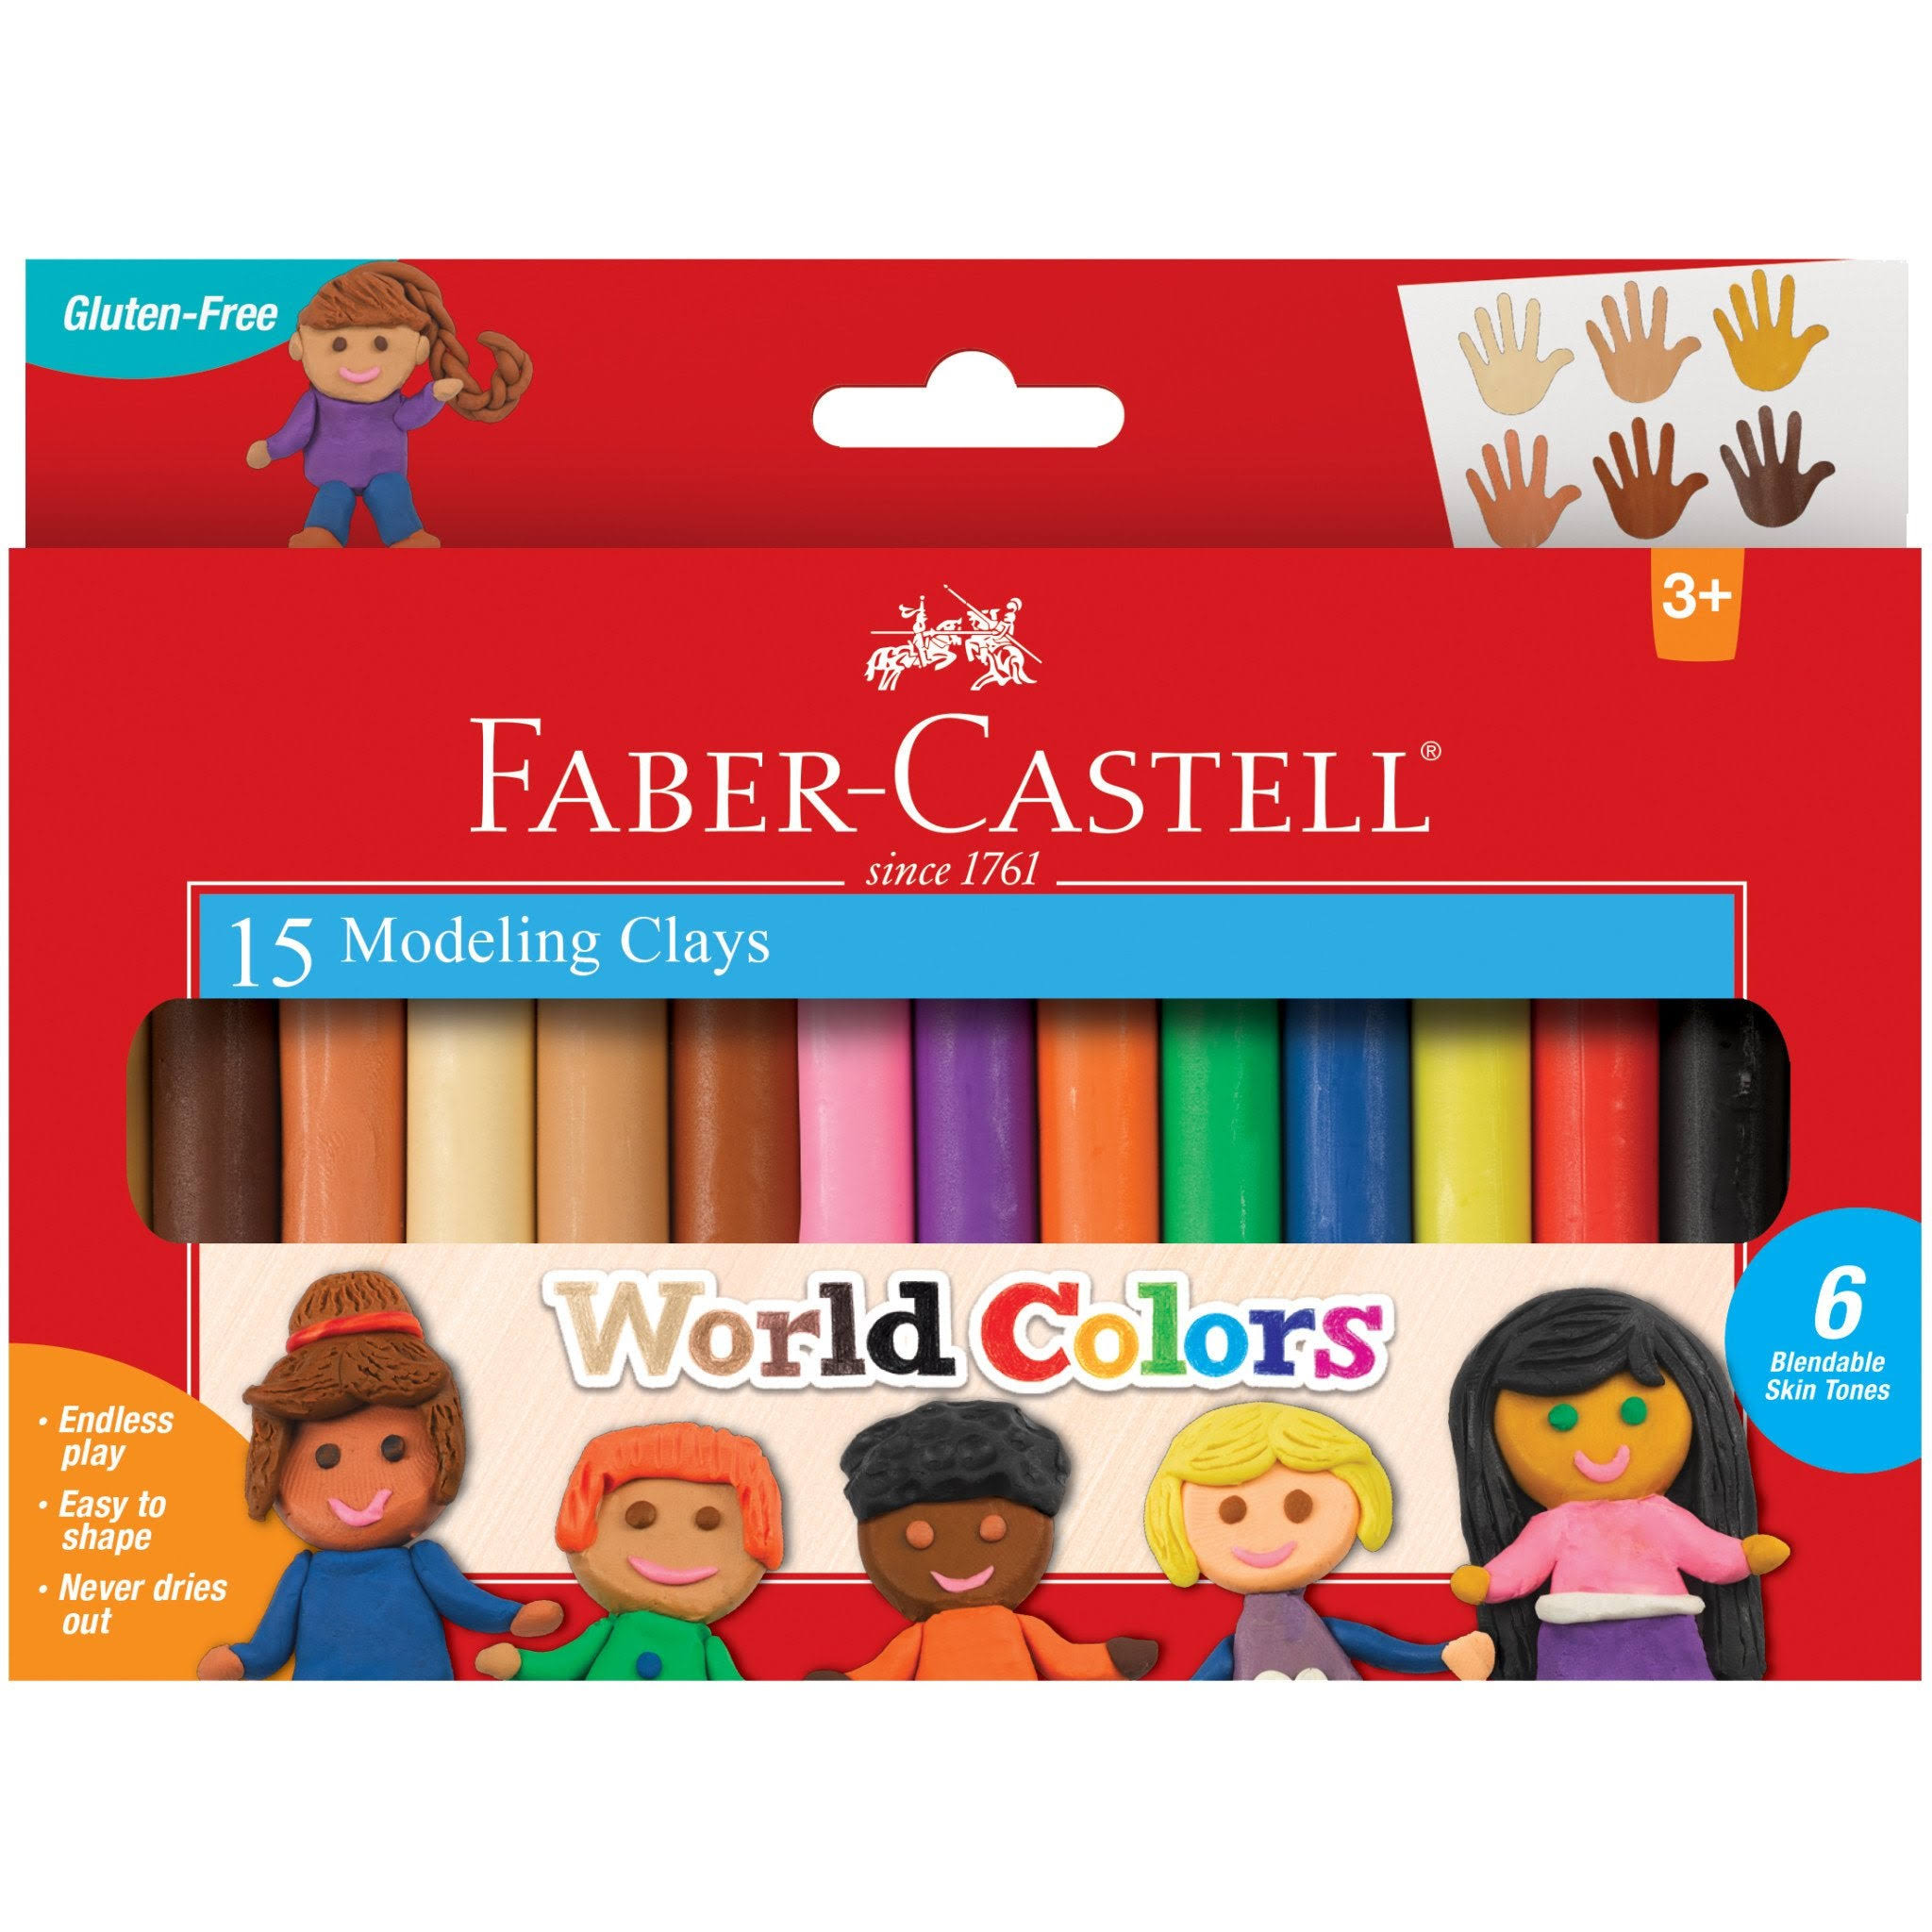 Faber Castell World Colors Modeling Clay Modeling Clay For Kids Sensory Play